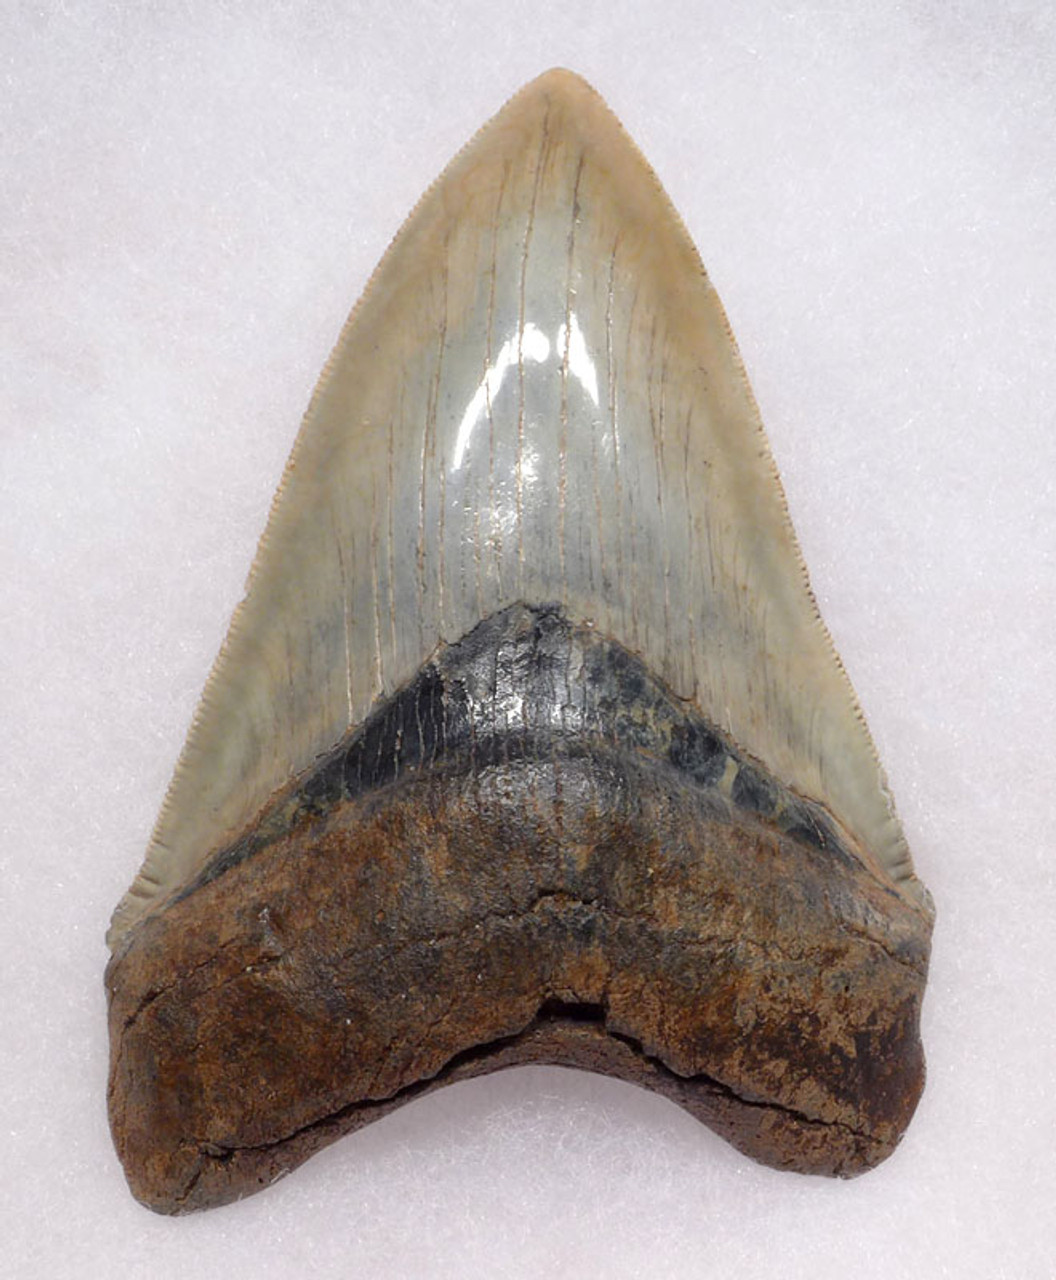 COLLECTOR GRADE 4 INCH MEGALODON SHARK TOOTH WITH PEARLY LUSTROUS CHAMPAGNE ENAMEL *SH6-376